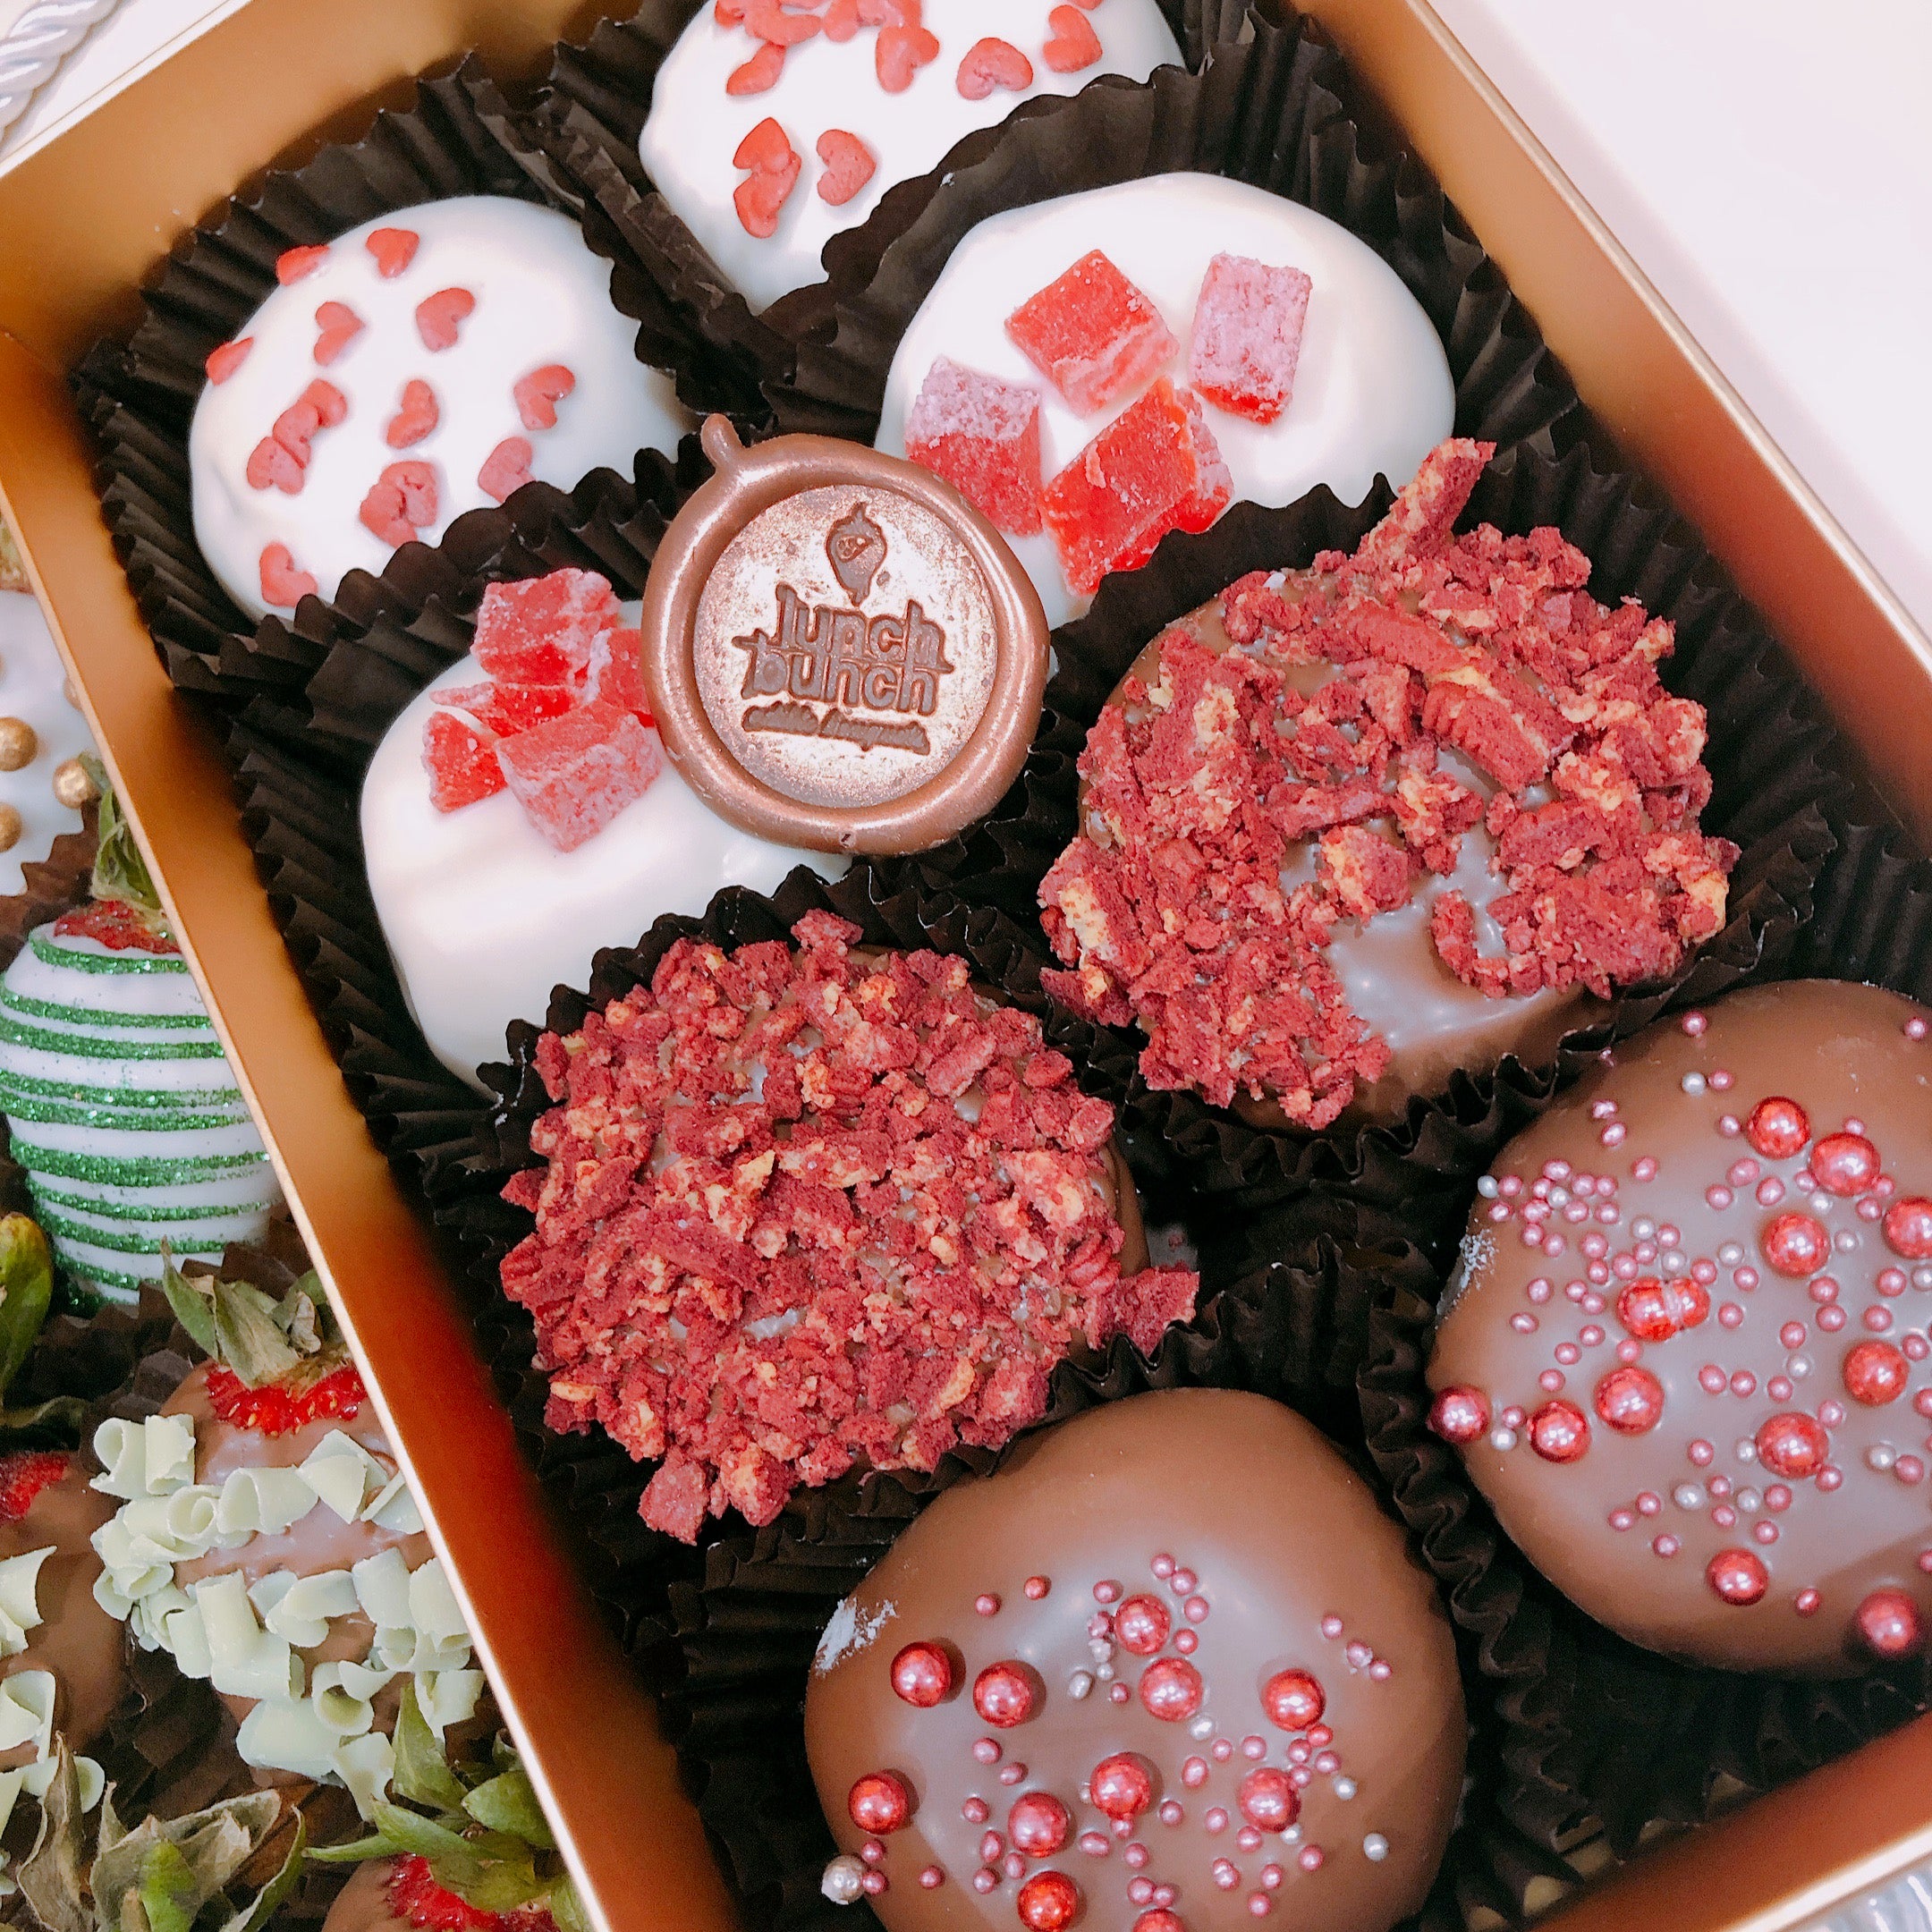 Chocolate strawberries and doughnuts hamper box, sweet treat strawberries with toppings and doughnuts